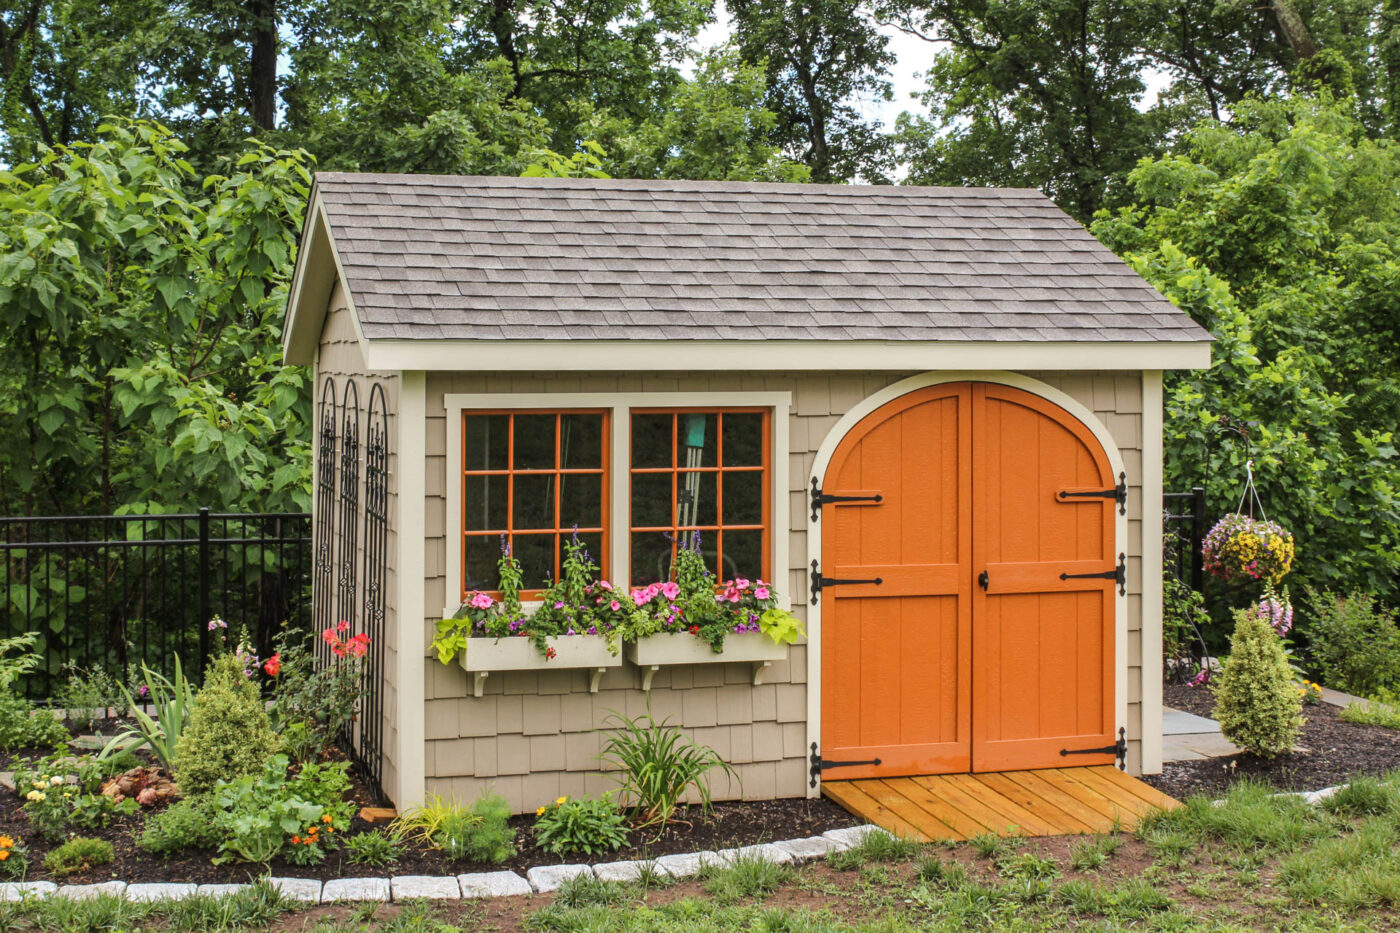 A workshop shed for sale in DE with an orange door.